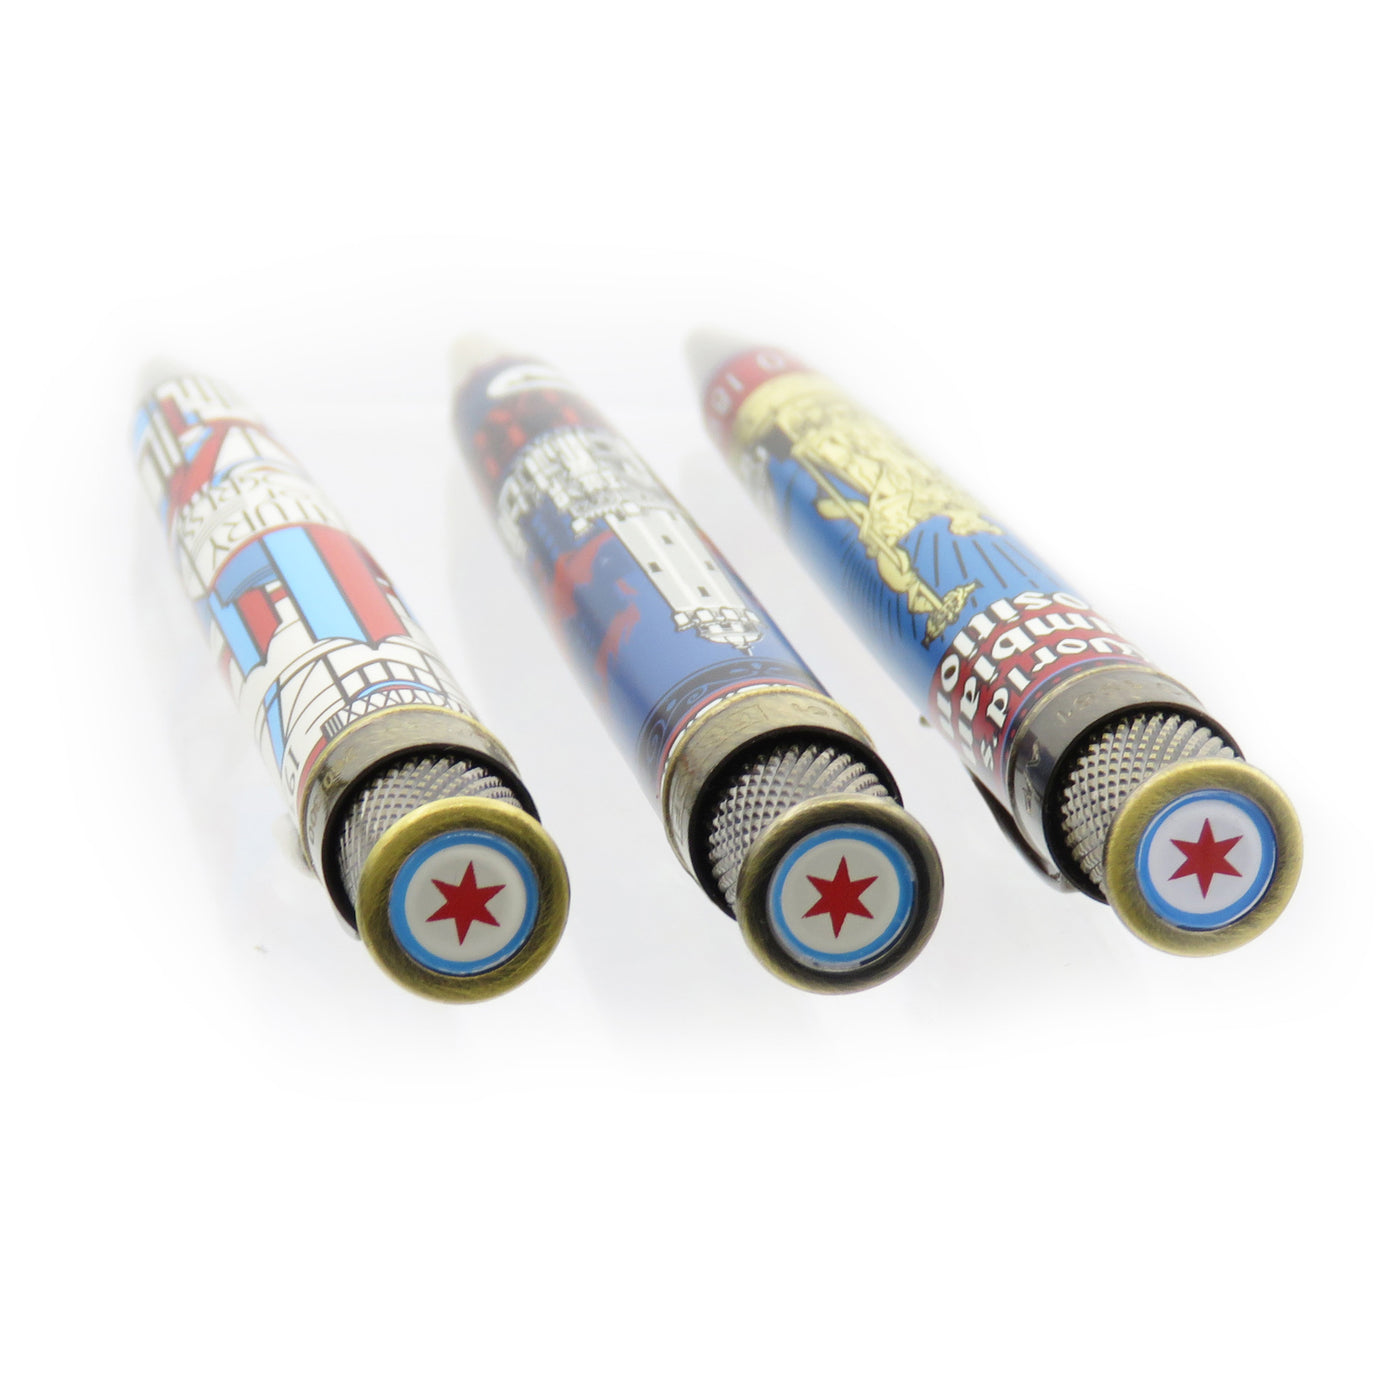 Retro 51 World's Columbian Exposition Rollerball Pen - Atlas Stationers Exclusive | Atlas Stationers.